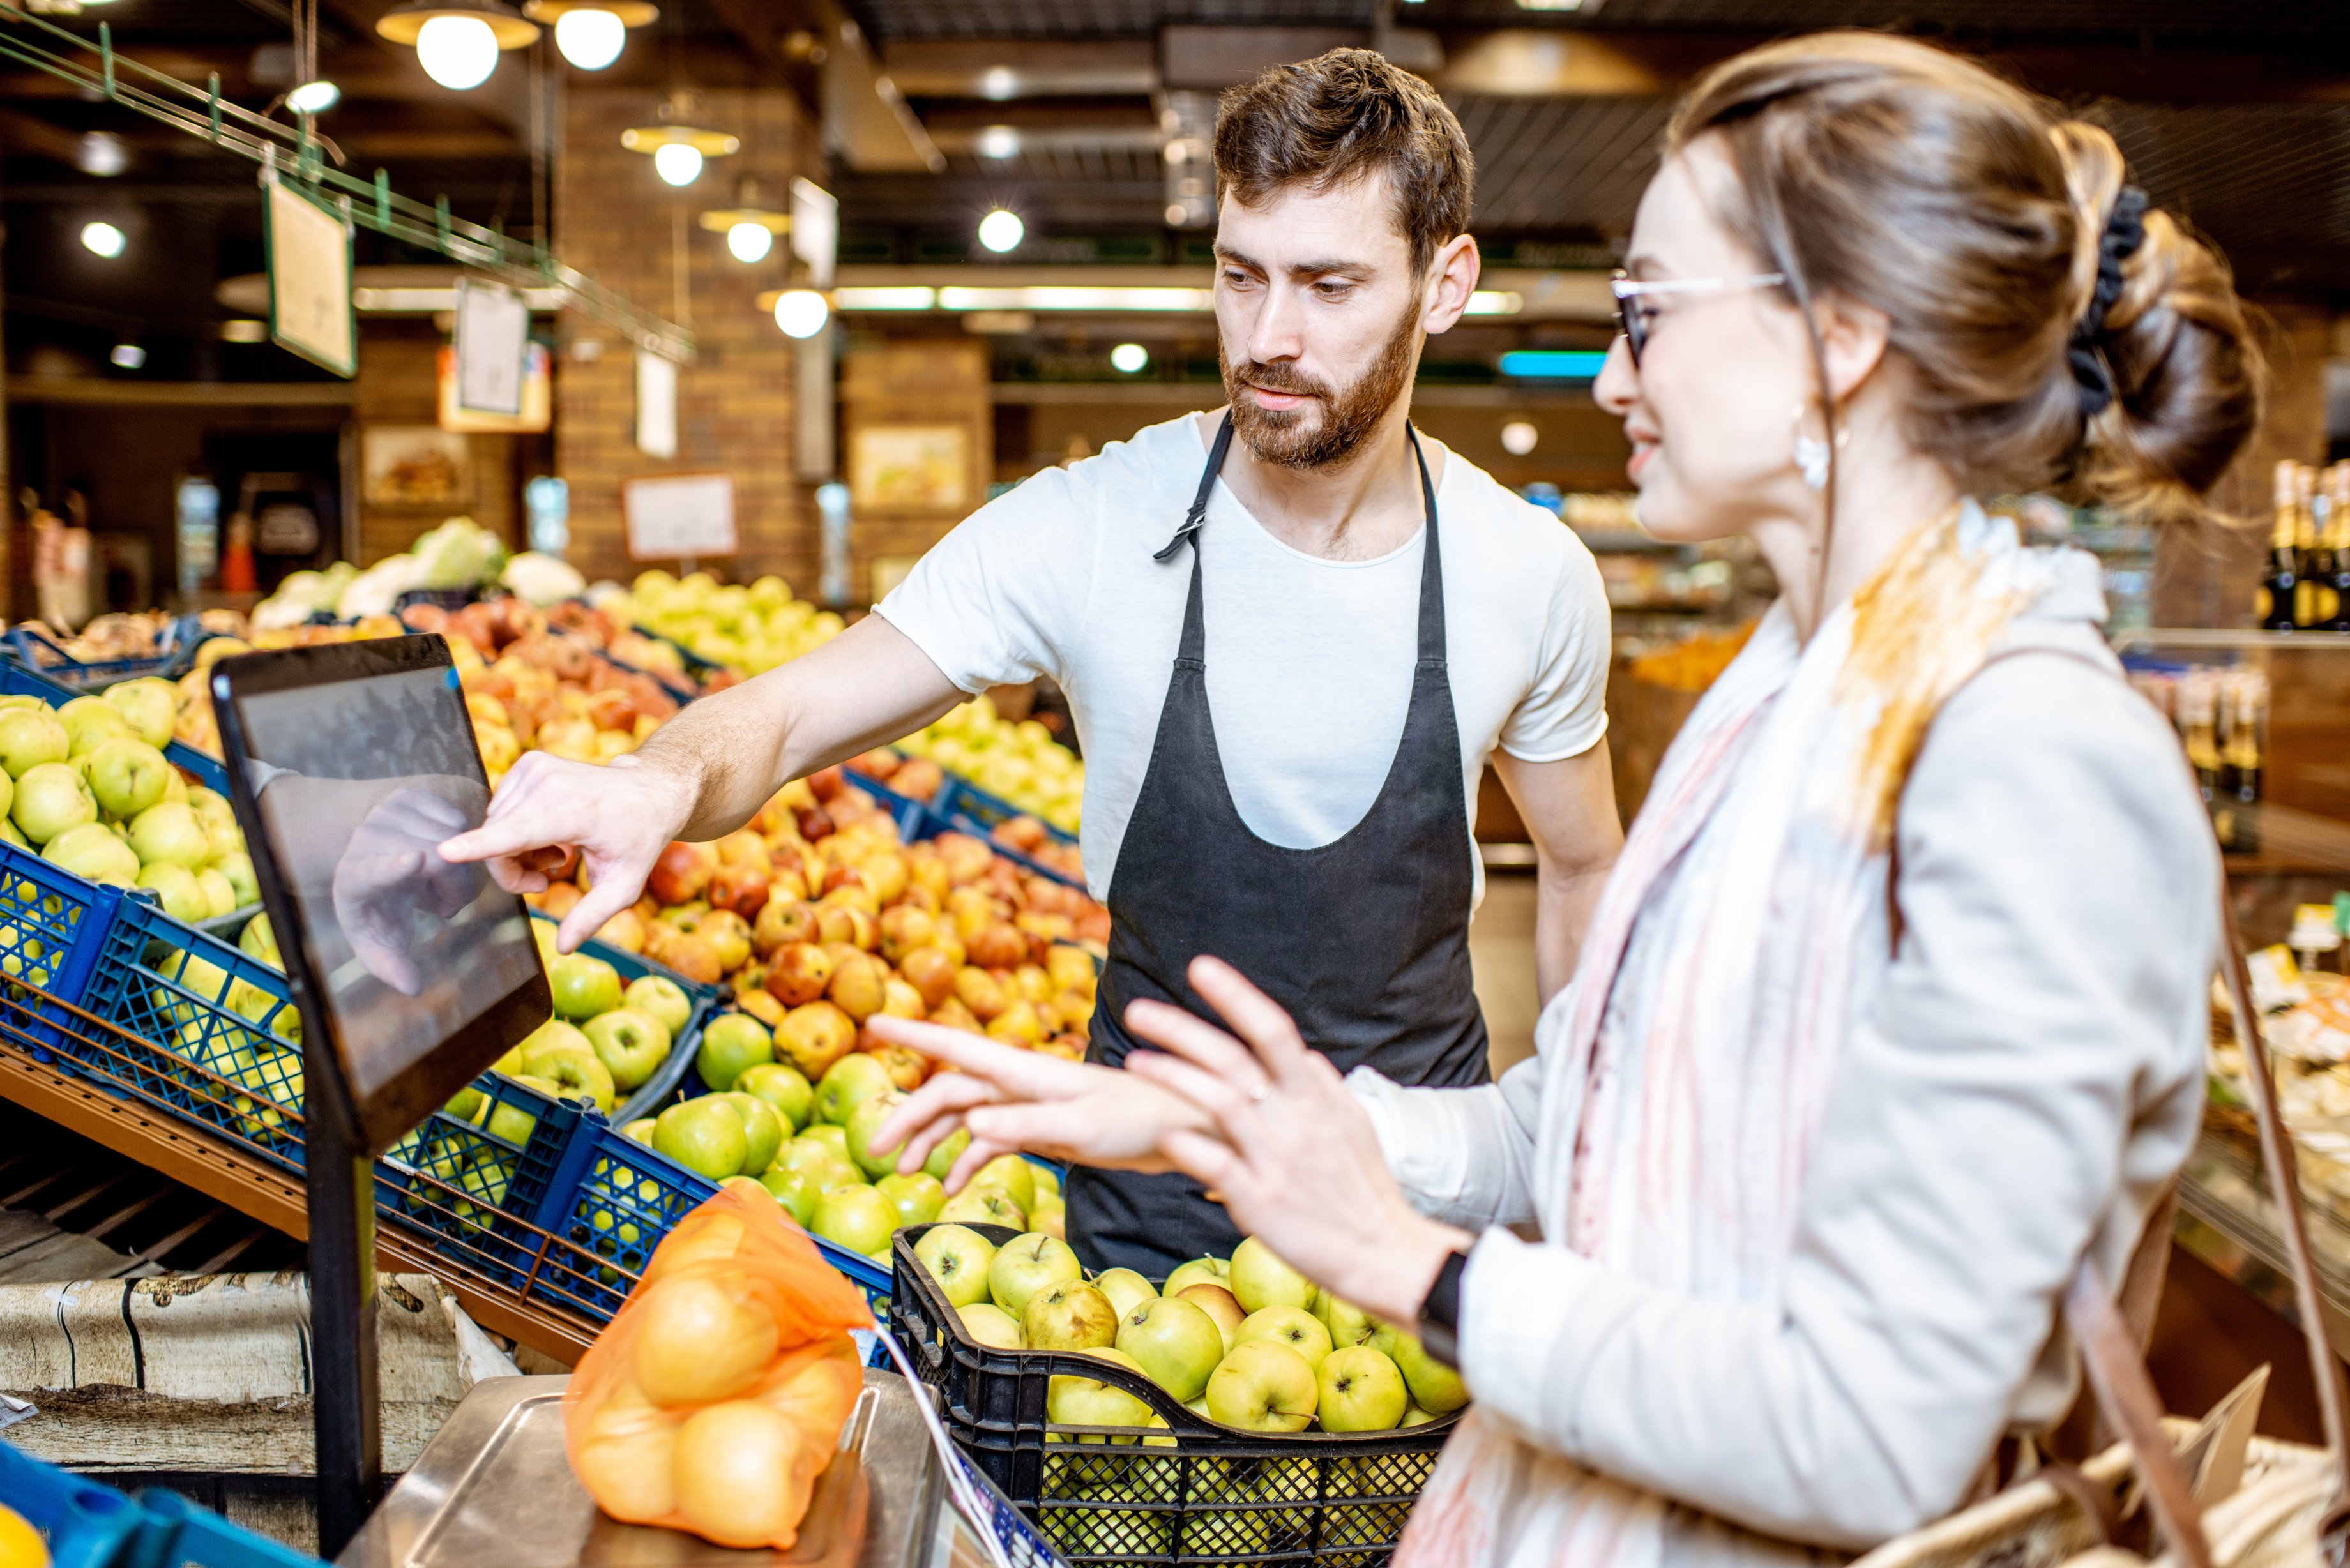 Sorry UK Grocers, your customer-centric strategy is outdated